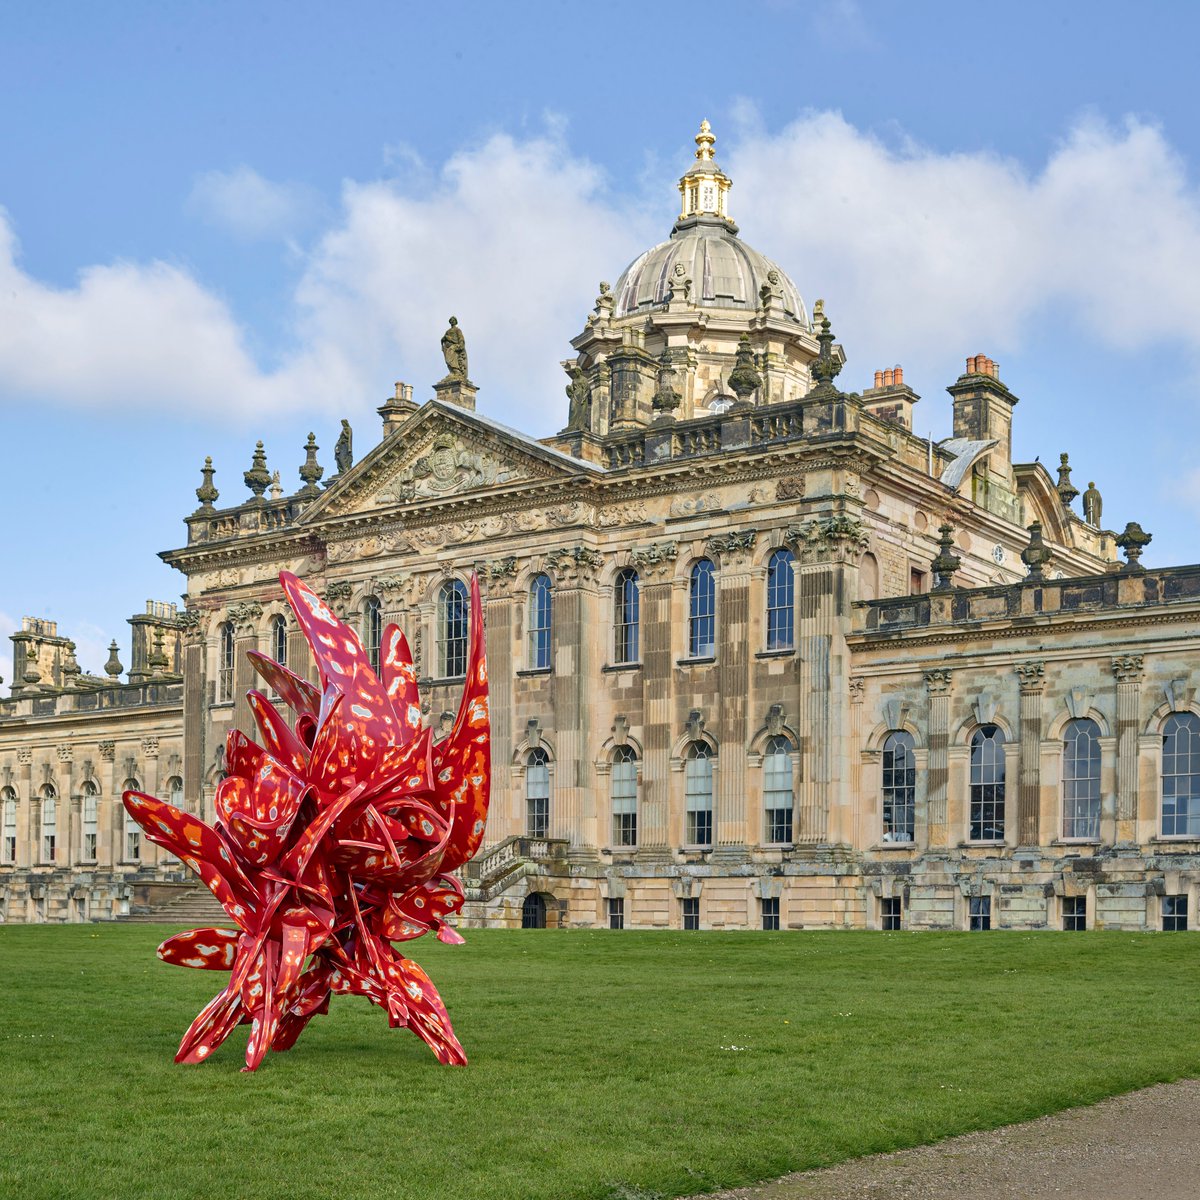 Tony Cragg at Castle Howard 3 May – 22 September Images: Photography by Michael Richter Industrial Nature, Aluminium, 2024, 240 x 176 x 191 cm Supported by @ThaddaeusRopac #CastleHoward #APlaceLikeNoOther #TonyCraggatCastleHoward